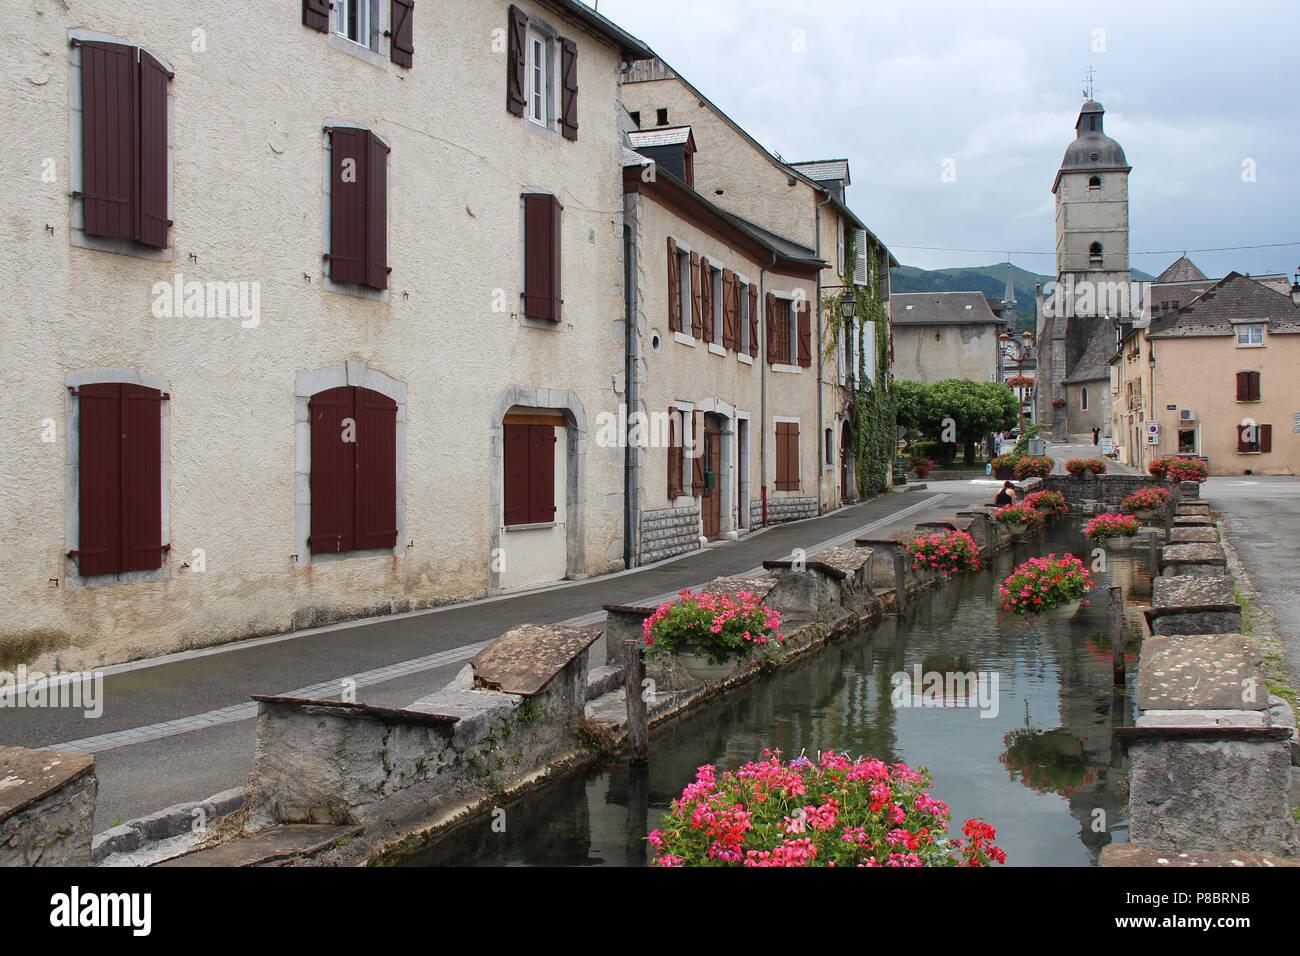 Laundries in Arudy (France). Stock Photo